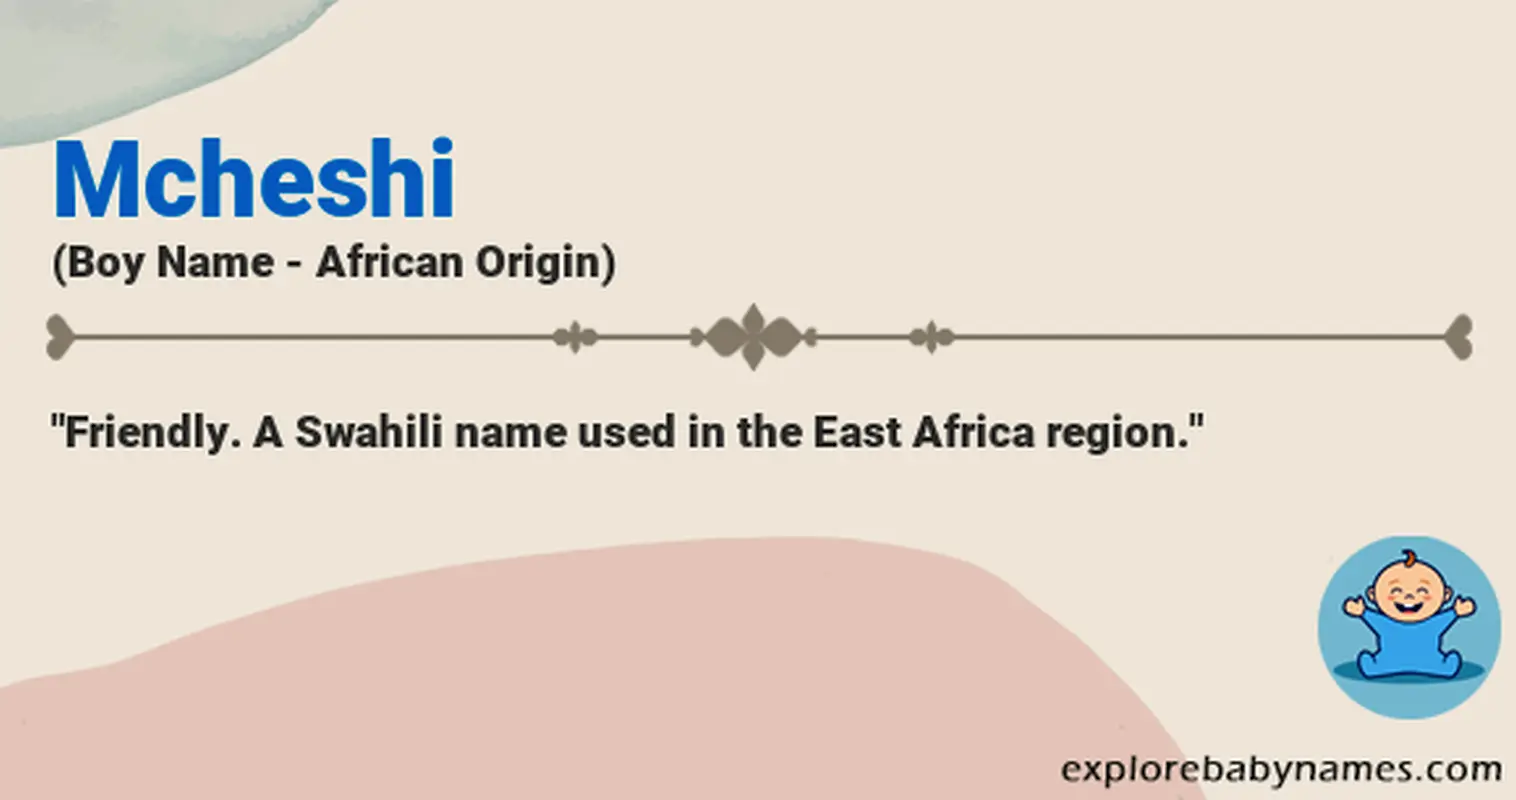 Meaning of Mcheshi